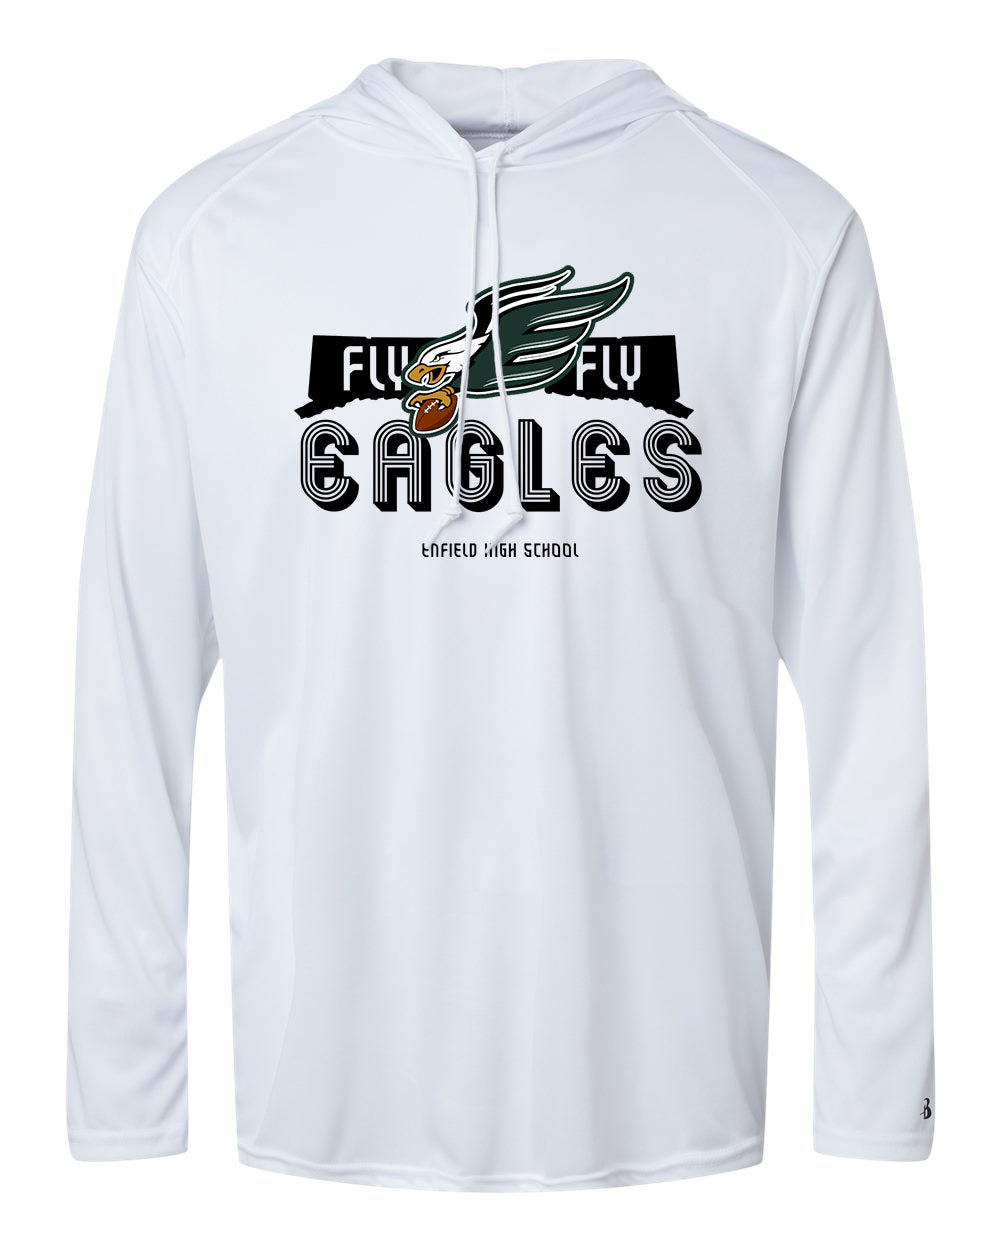 Enfield Eagles Football Adult Hooded Longsleeve T-shirt "Fly" - 4105 (color options available)